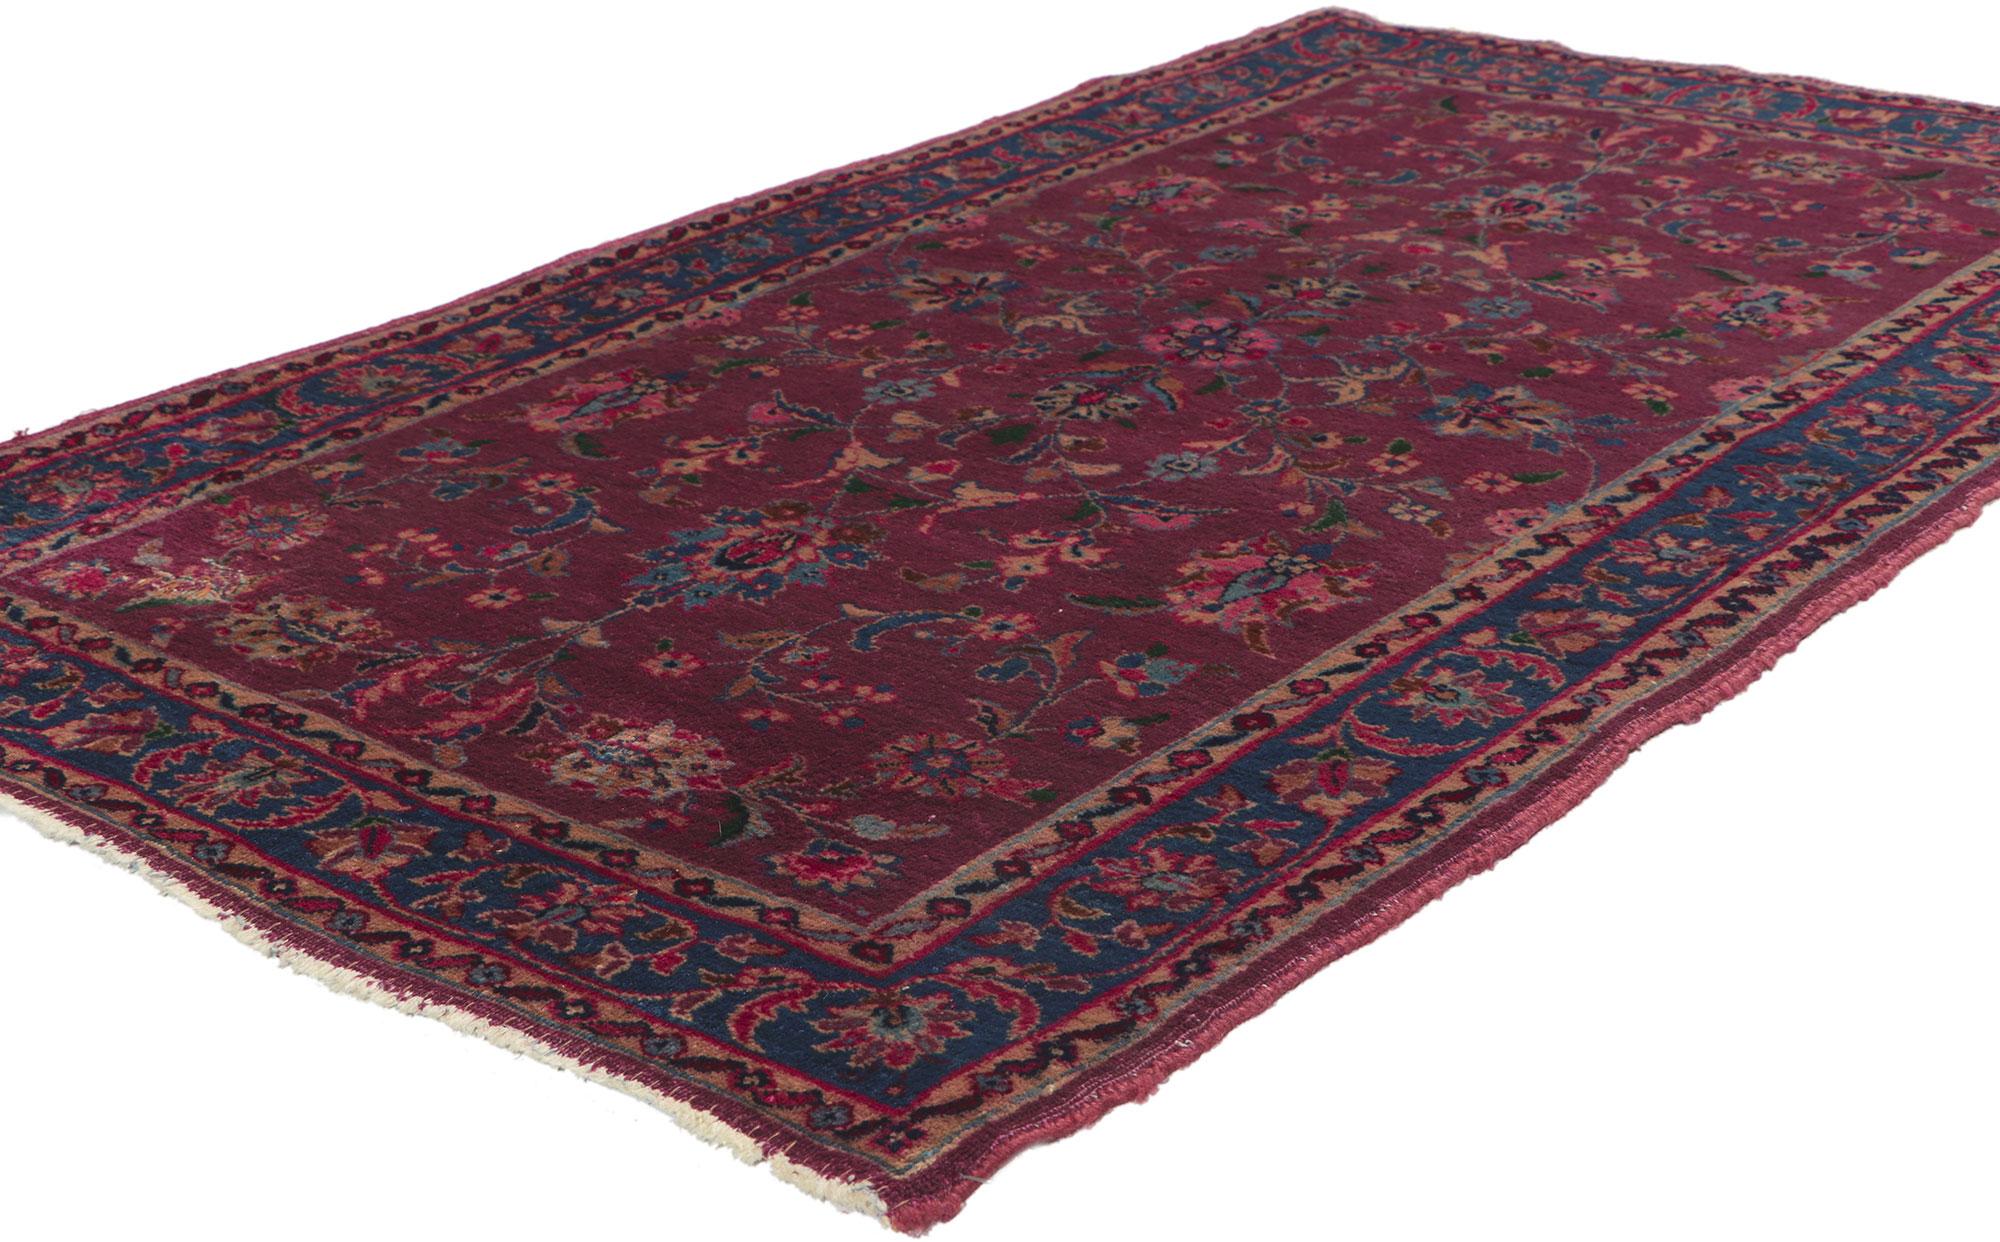 78306 Antique Persian Yazd rug, 03'00 x 05'02.
Perfect for a small space, reading nook, grand foyer, designer entry, study, studio, den, walk-in closet, stair landing, alcove, mudroom, master bathroom, entryway, bedroom, private library, private